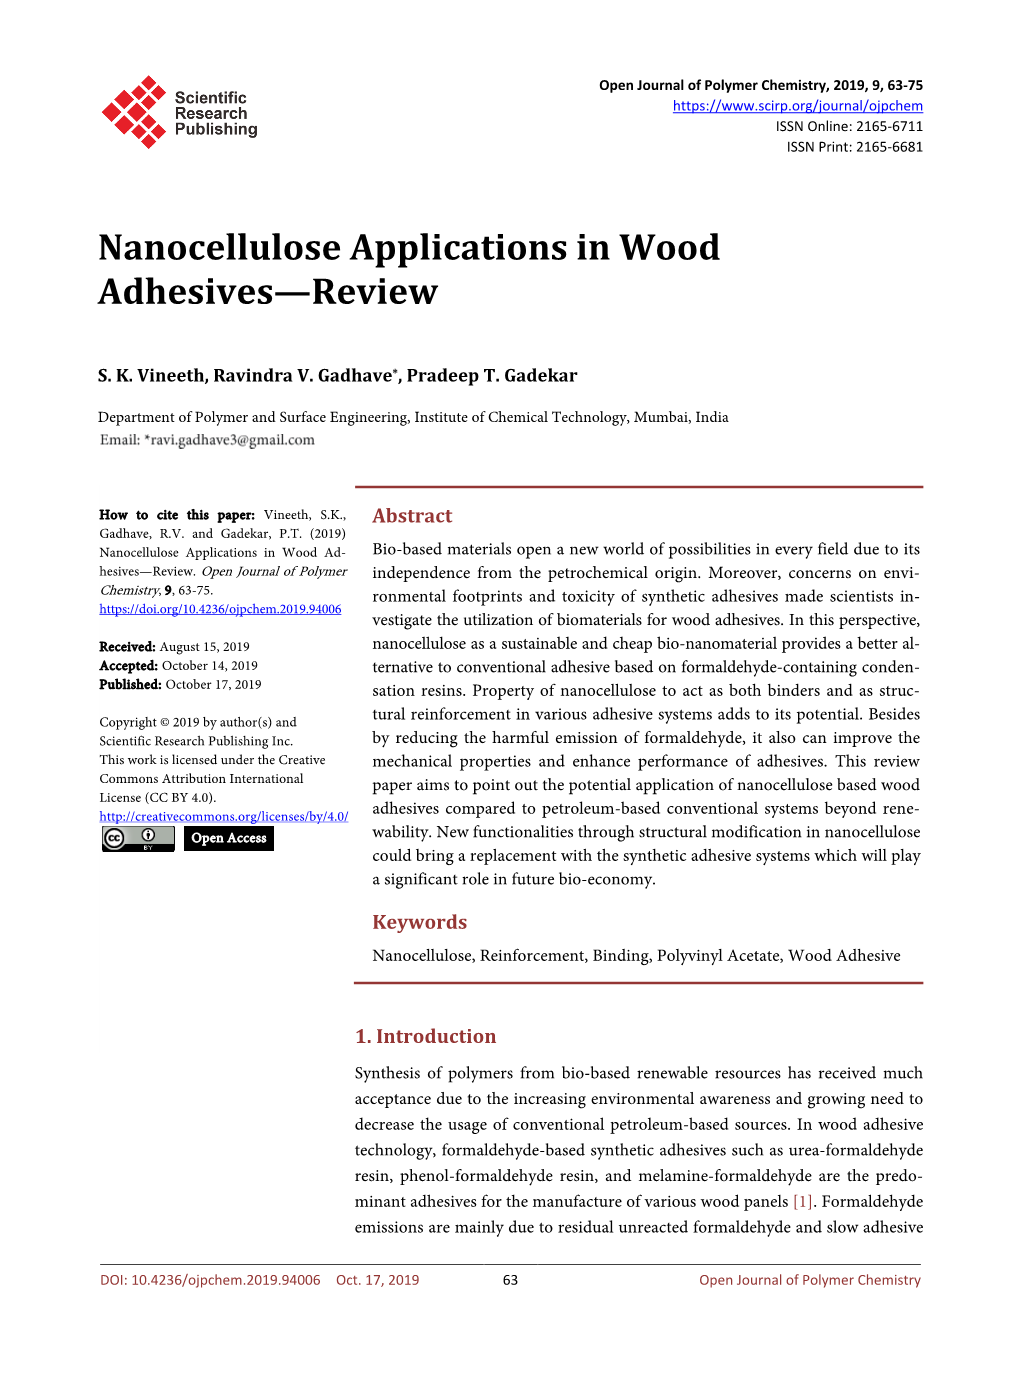 Nanocellulose Applications in Wood Adhesives—Review